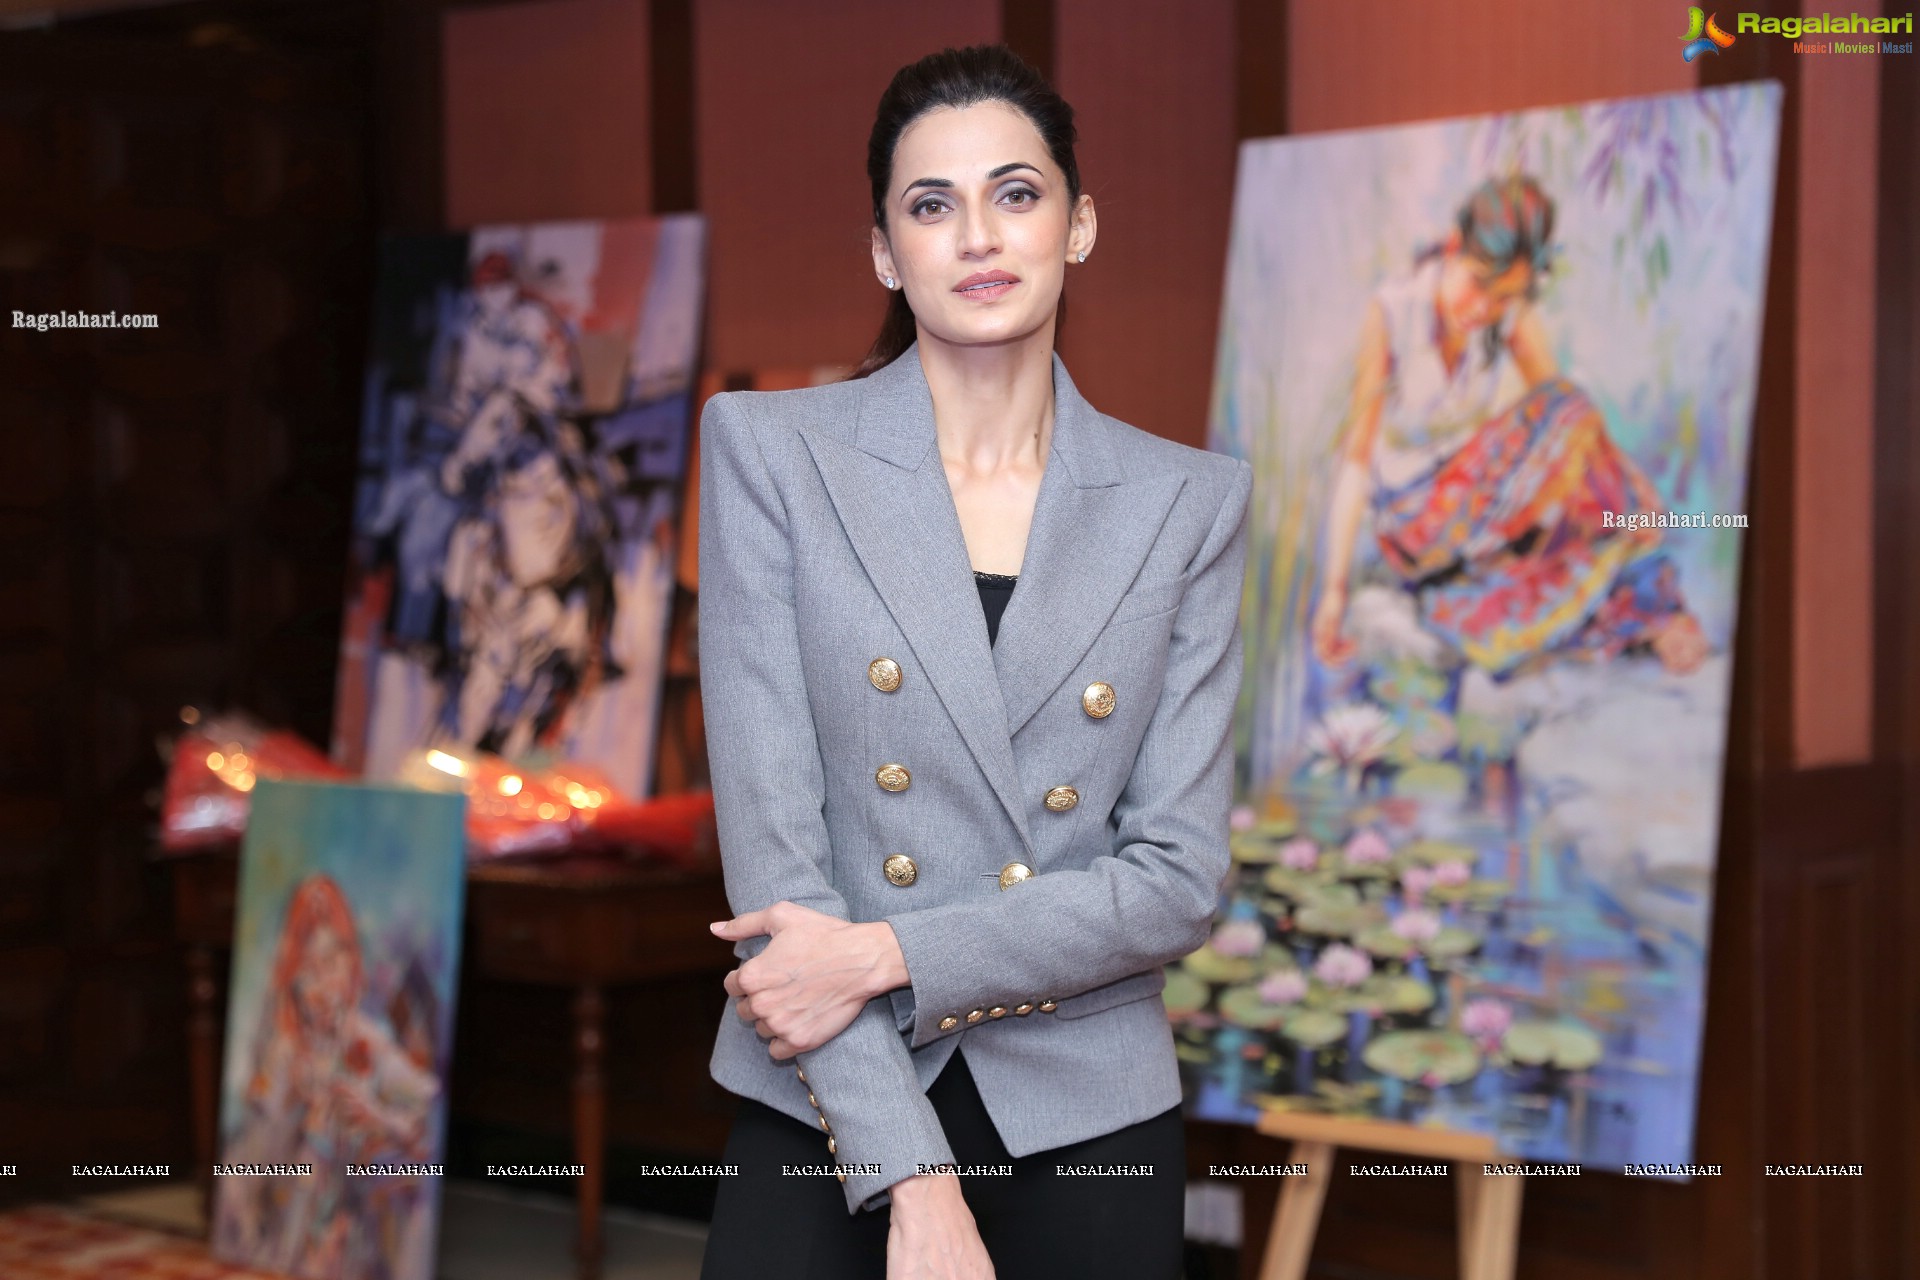 Shilpa Reddy at Paintings Exhibition Behance Artfest 2021, HD Photo Gallery